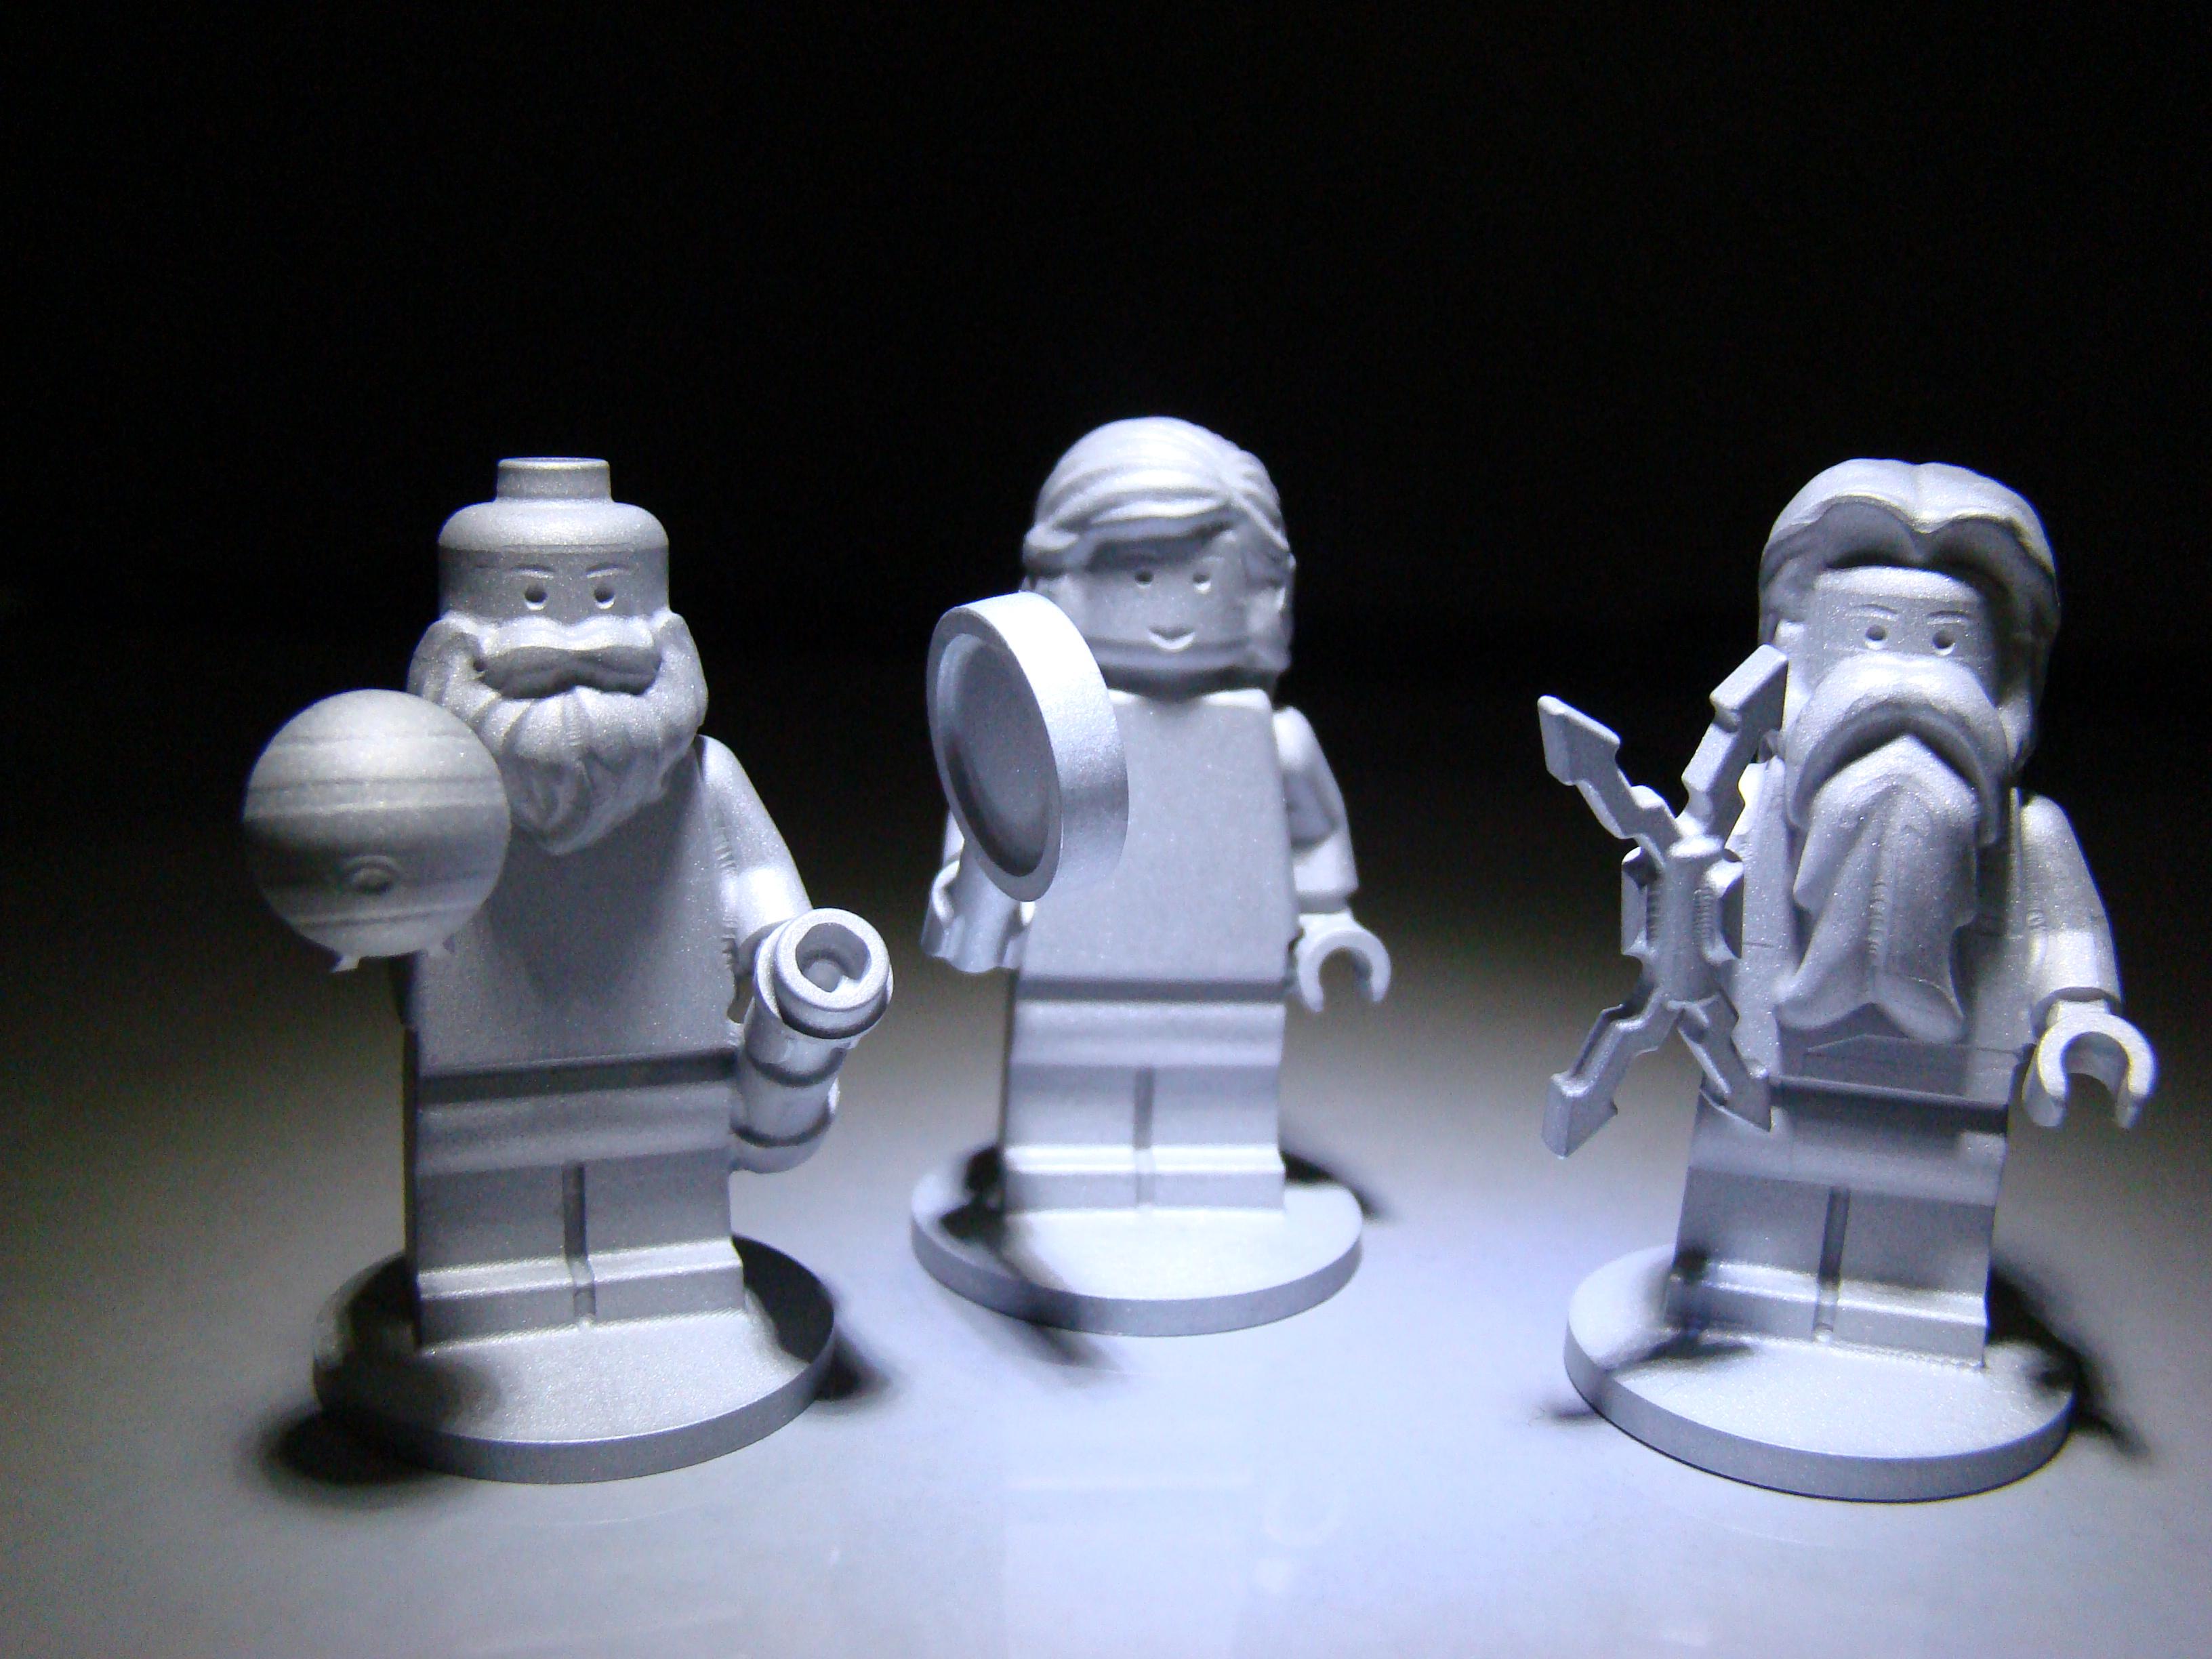 Photo of three LEGO figures that will be discussed in the following reading.